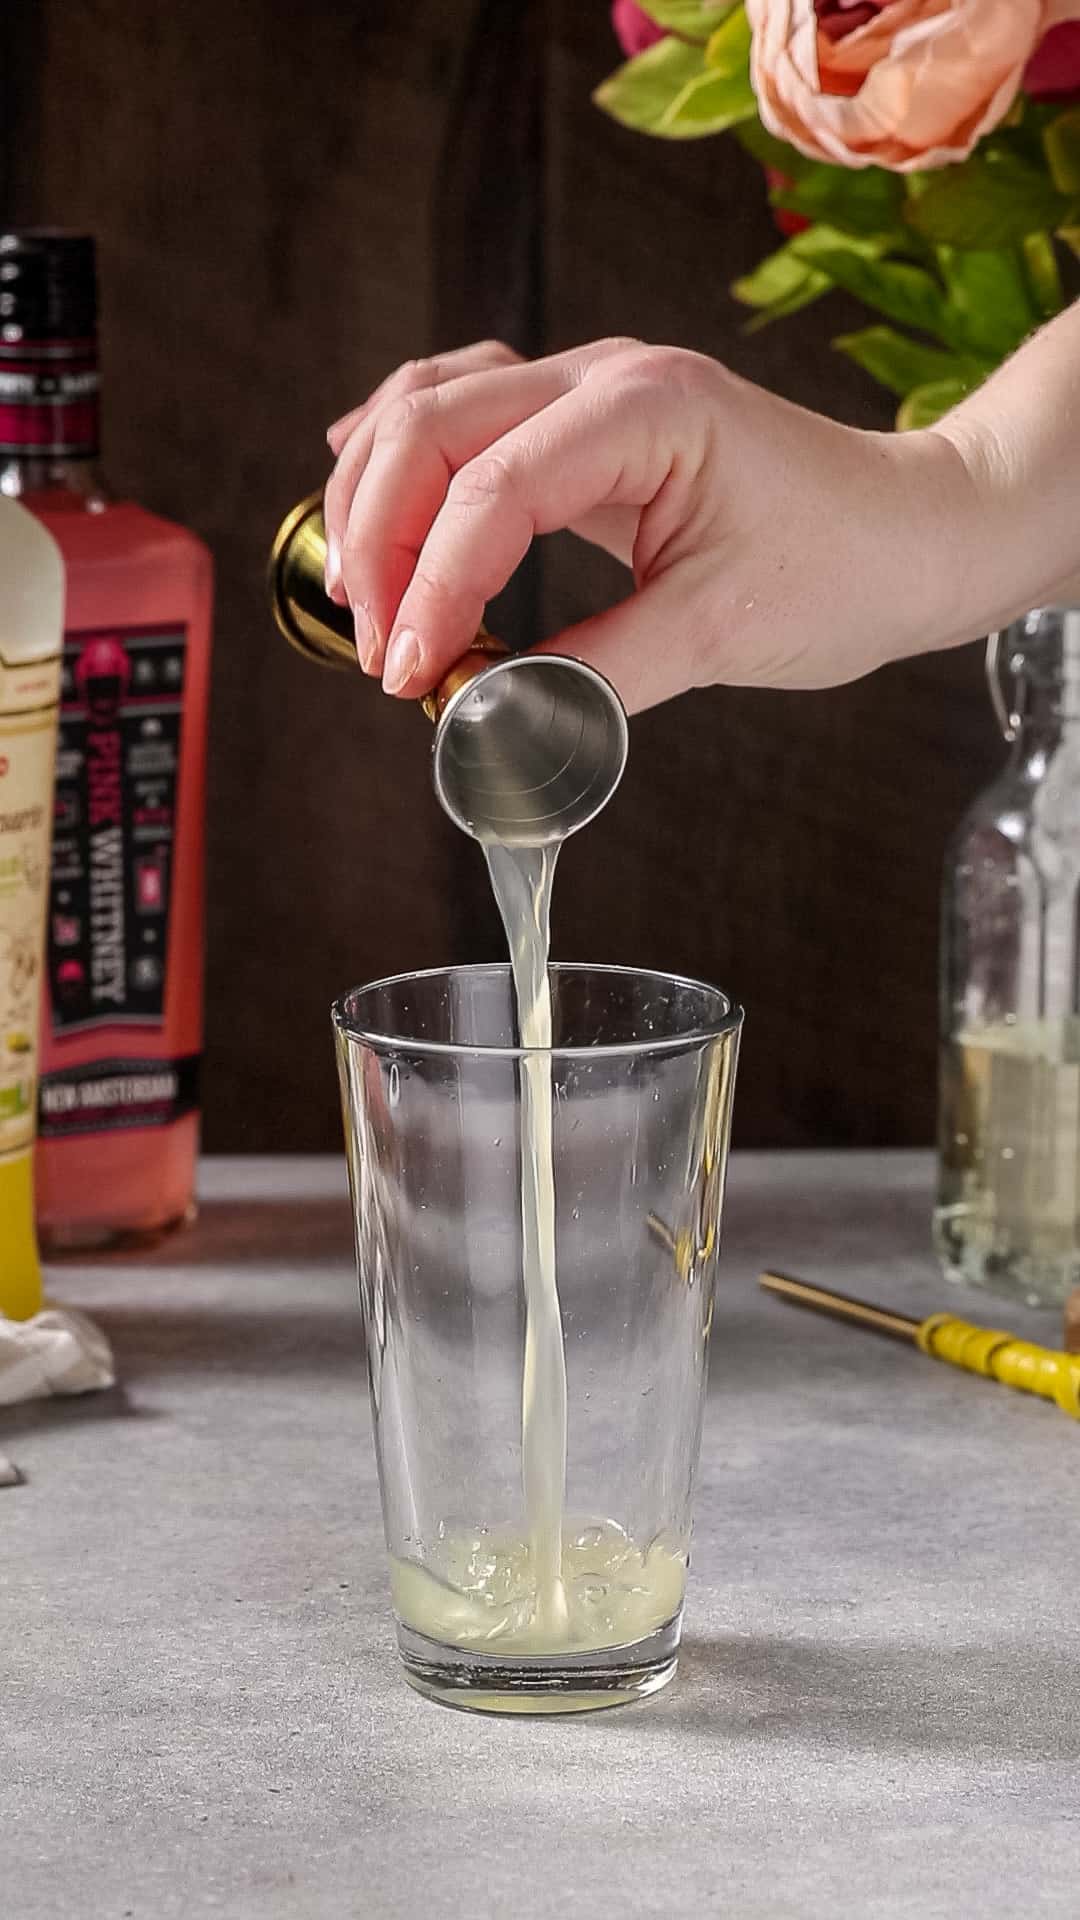 Limoncello being added to a mixing glass.